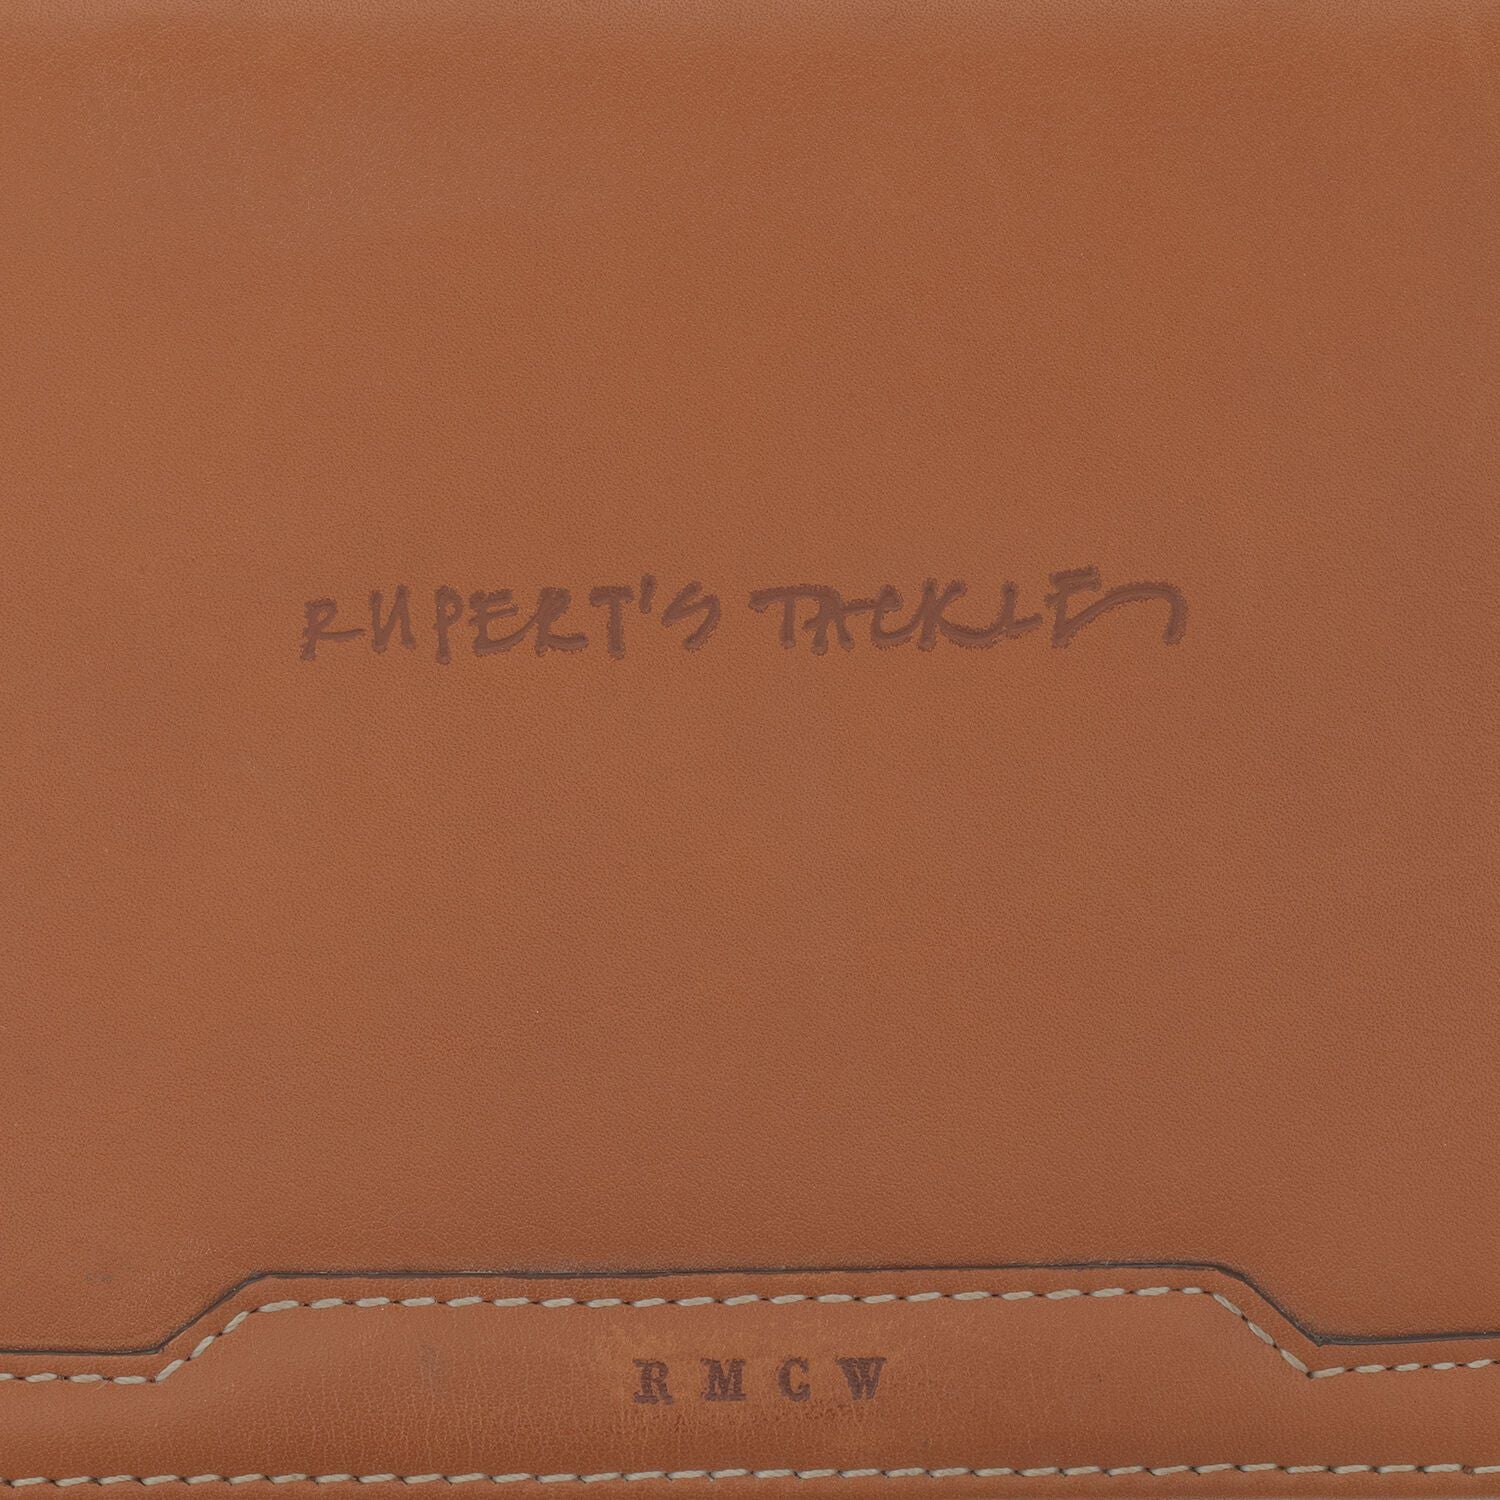 Bespoke Fishermans Fly Box -

                  
                    Butter Leather in Tan -
                  

                  Anya Hindmarch EU
